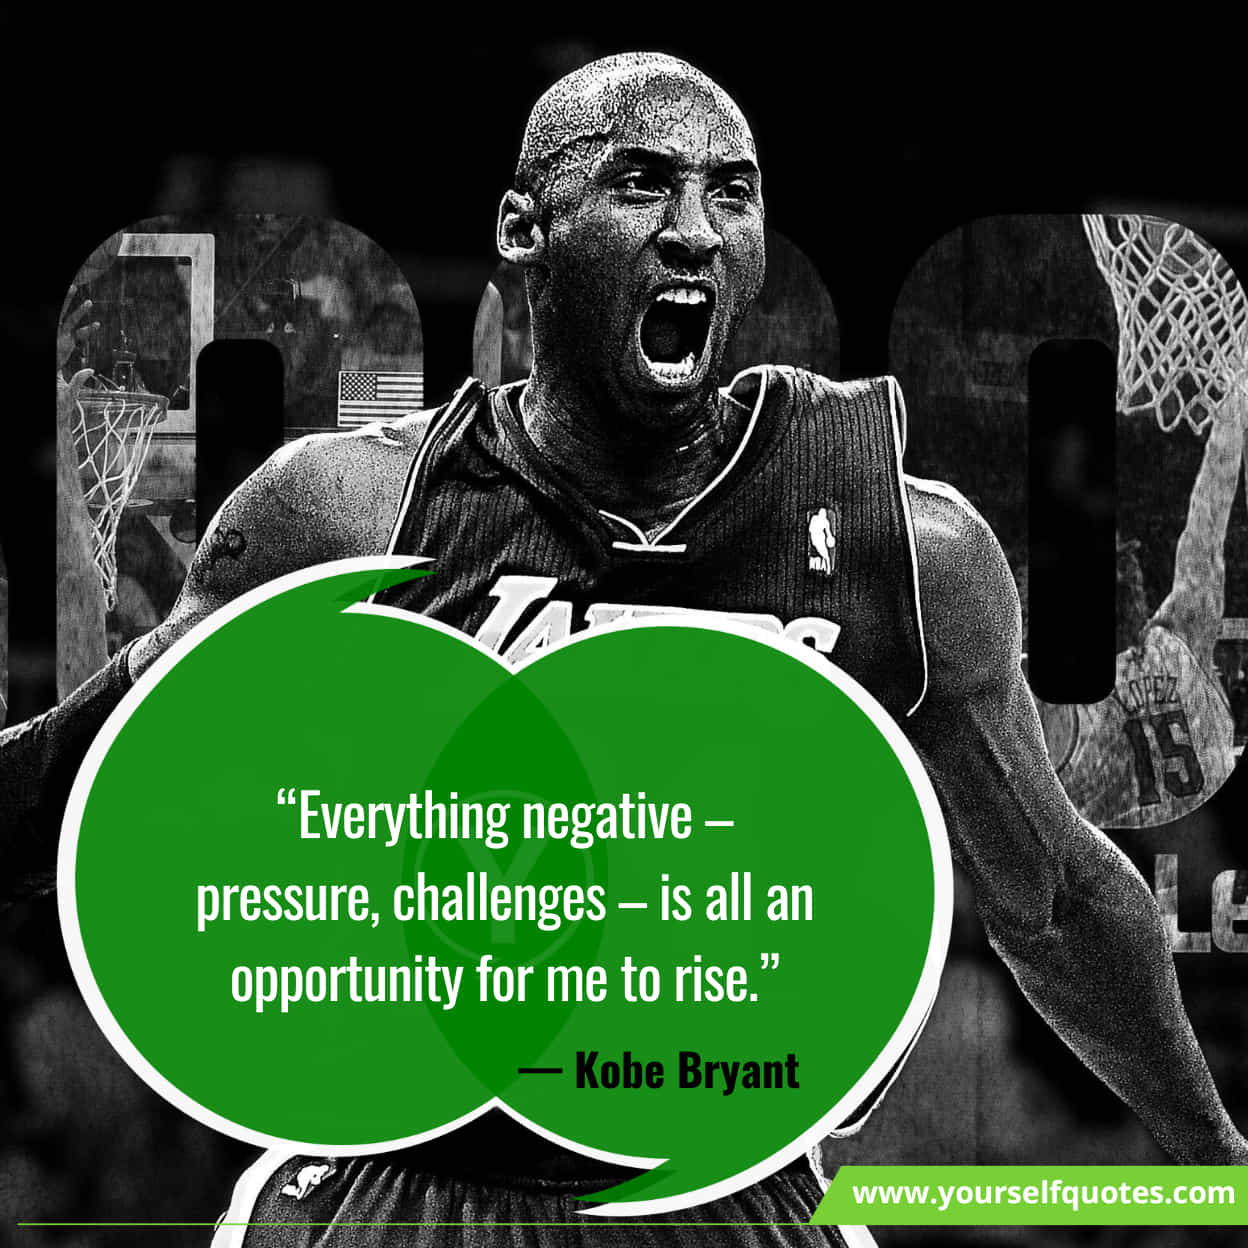 Best Quotes By Kobe Bryant For Life